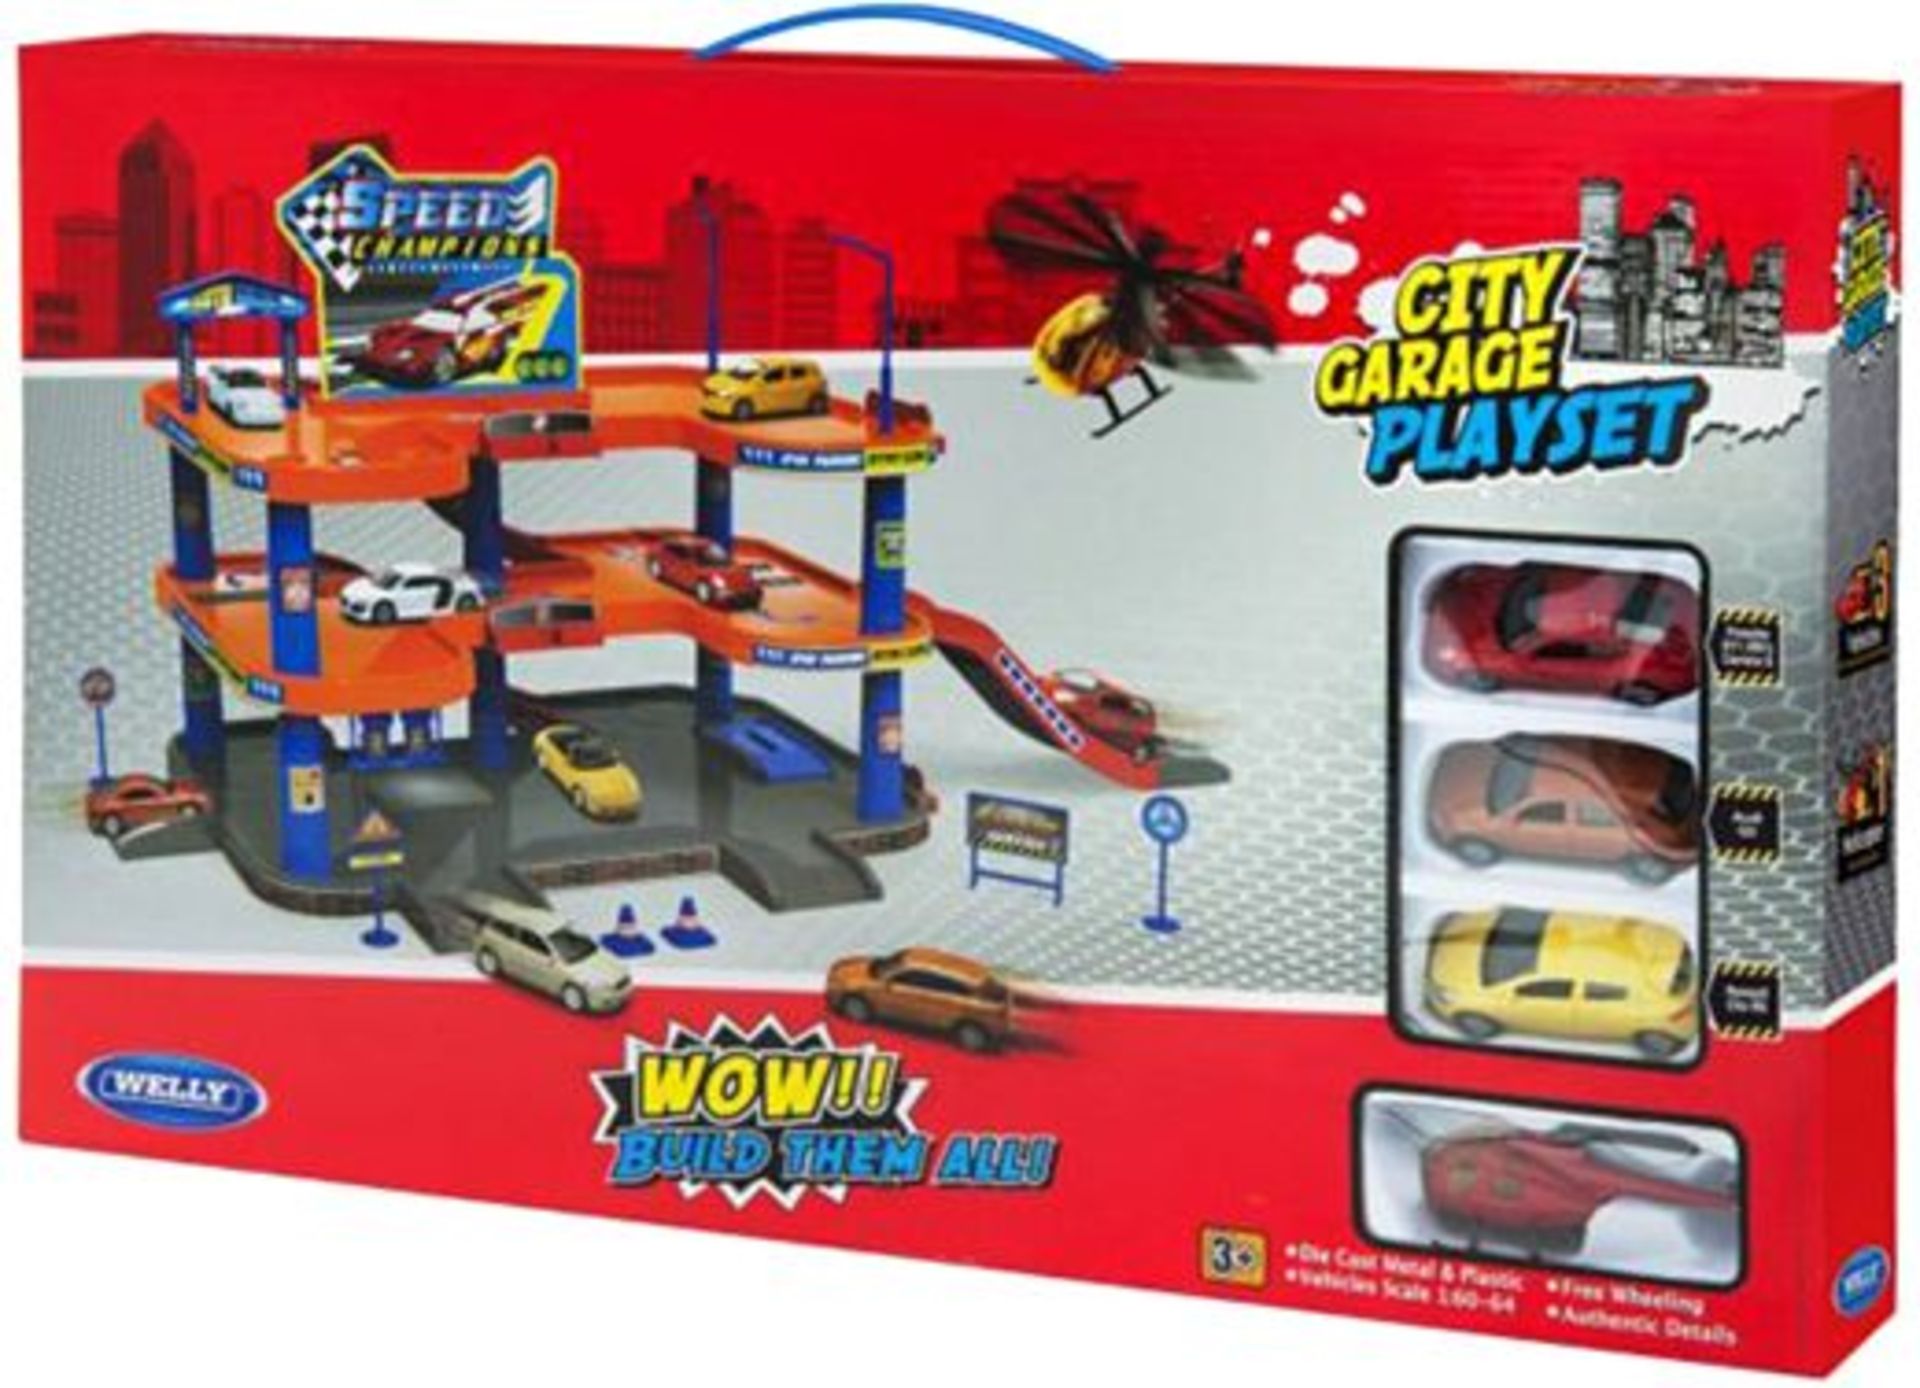 V Brand New Garage With 3 Die-Cast Cars And 1 Helicopter (item is similar to picture)